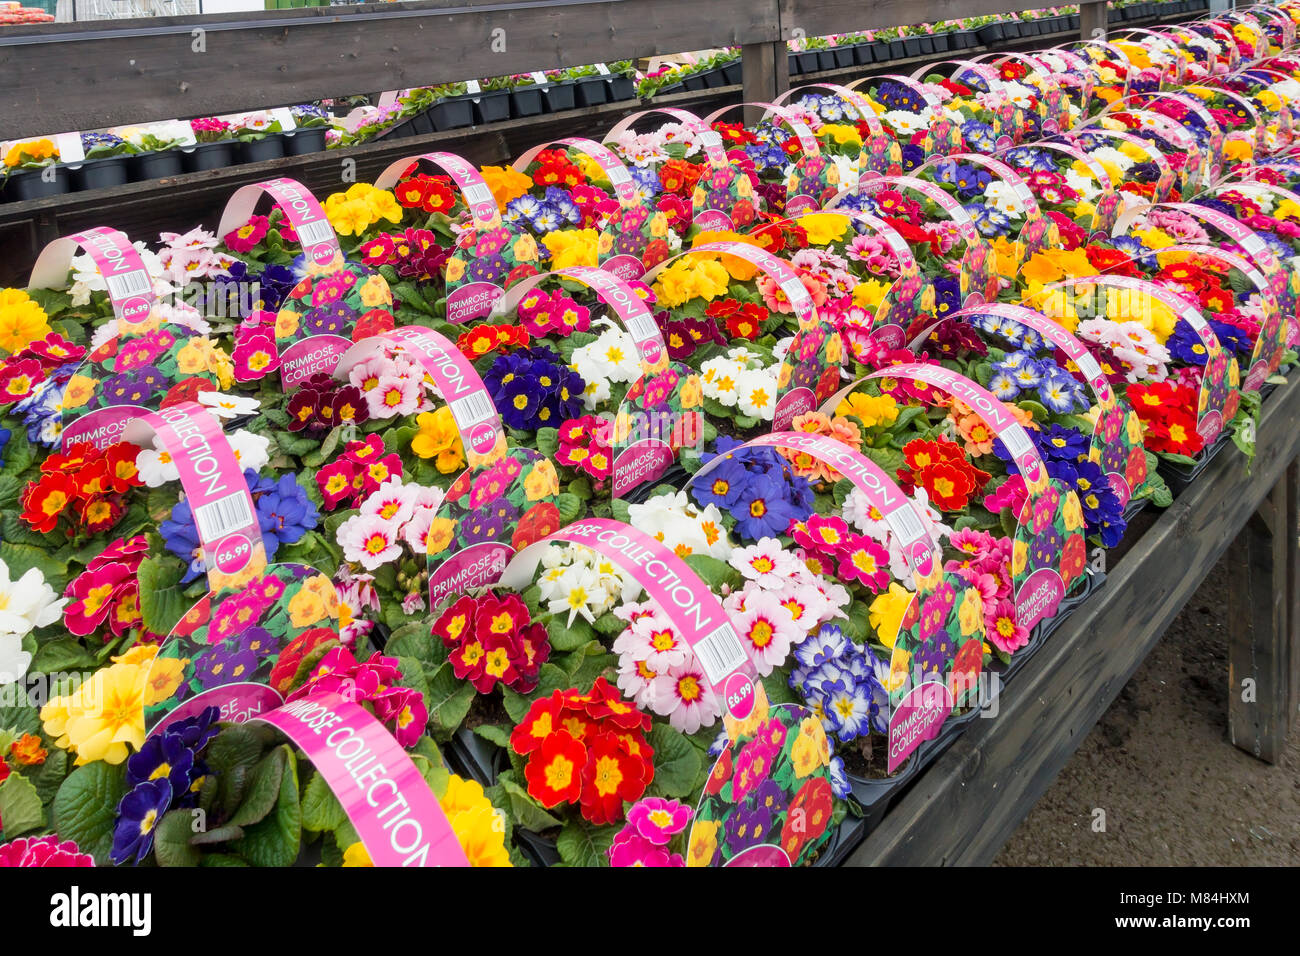 Garden Centre display of Multi-coloured Primroses for sale as bedding plants for spring planting label showing prices £6.99 per box of six plants Stock Photo